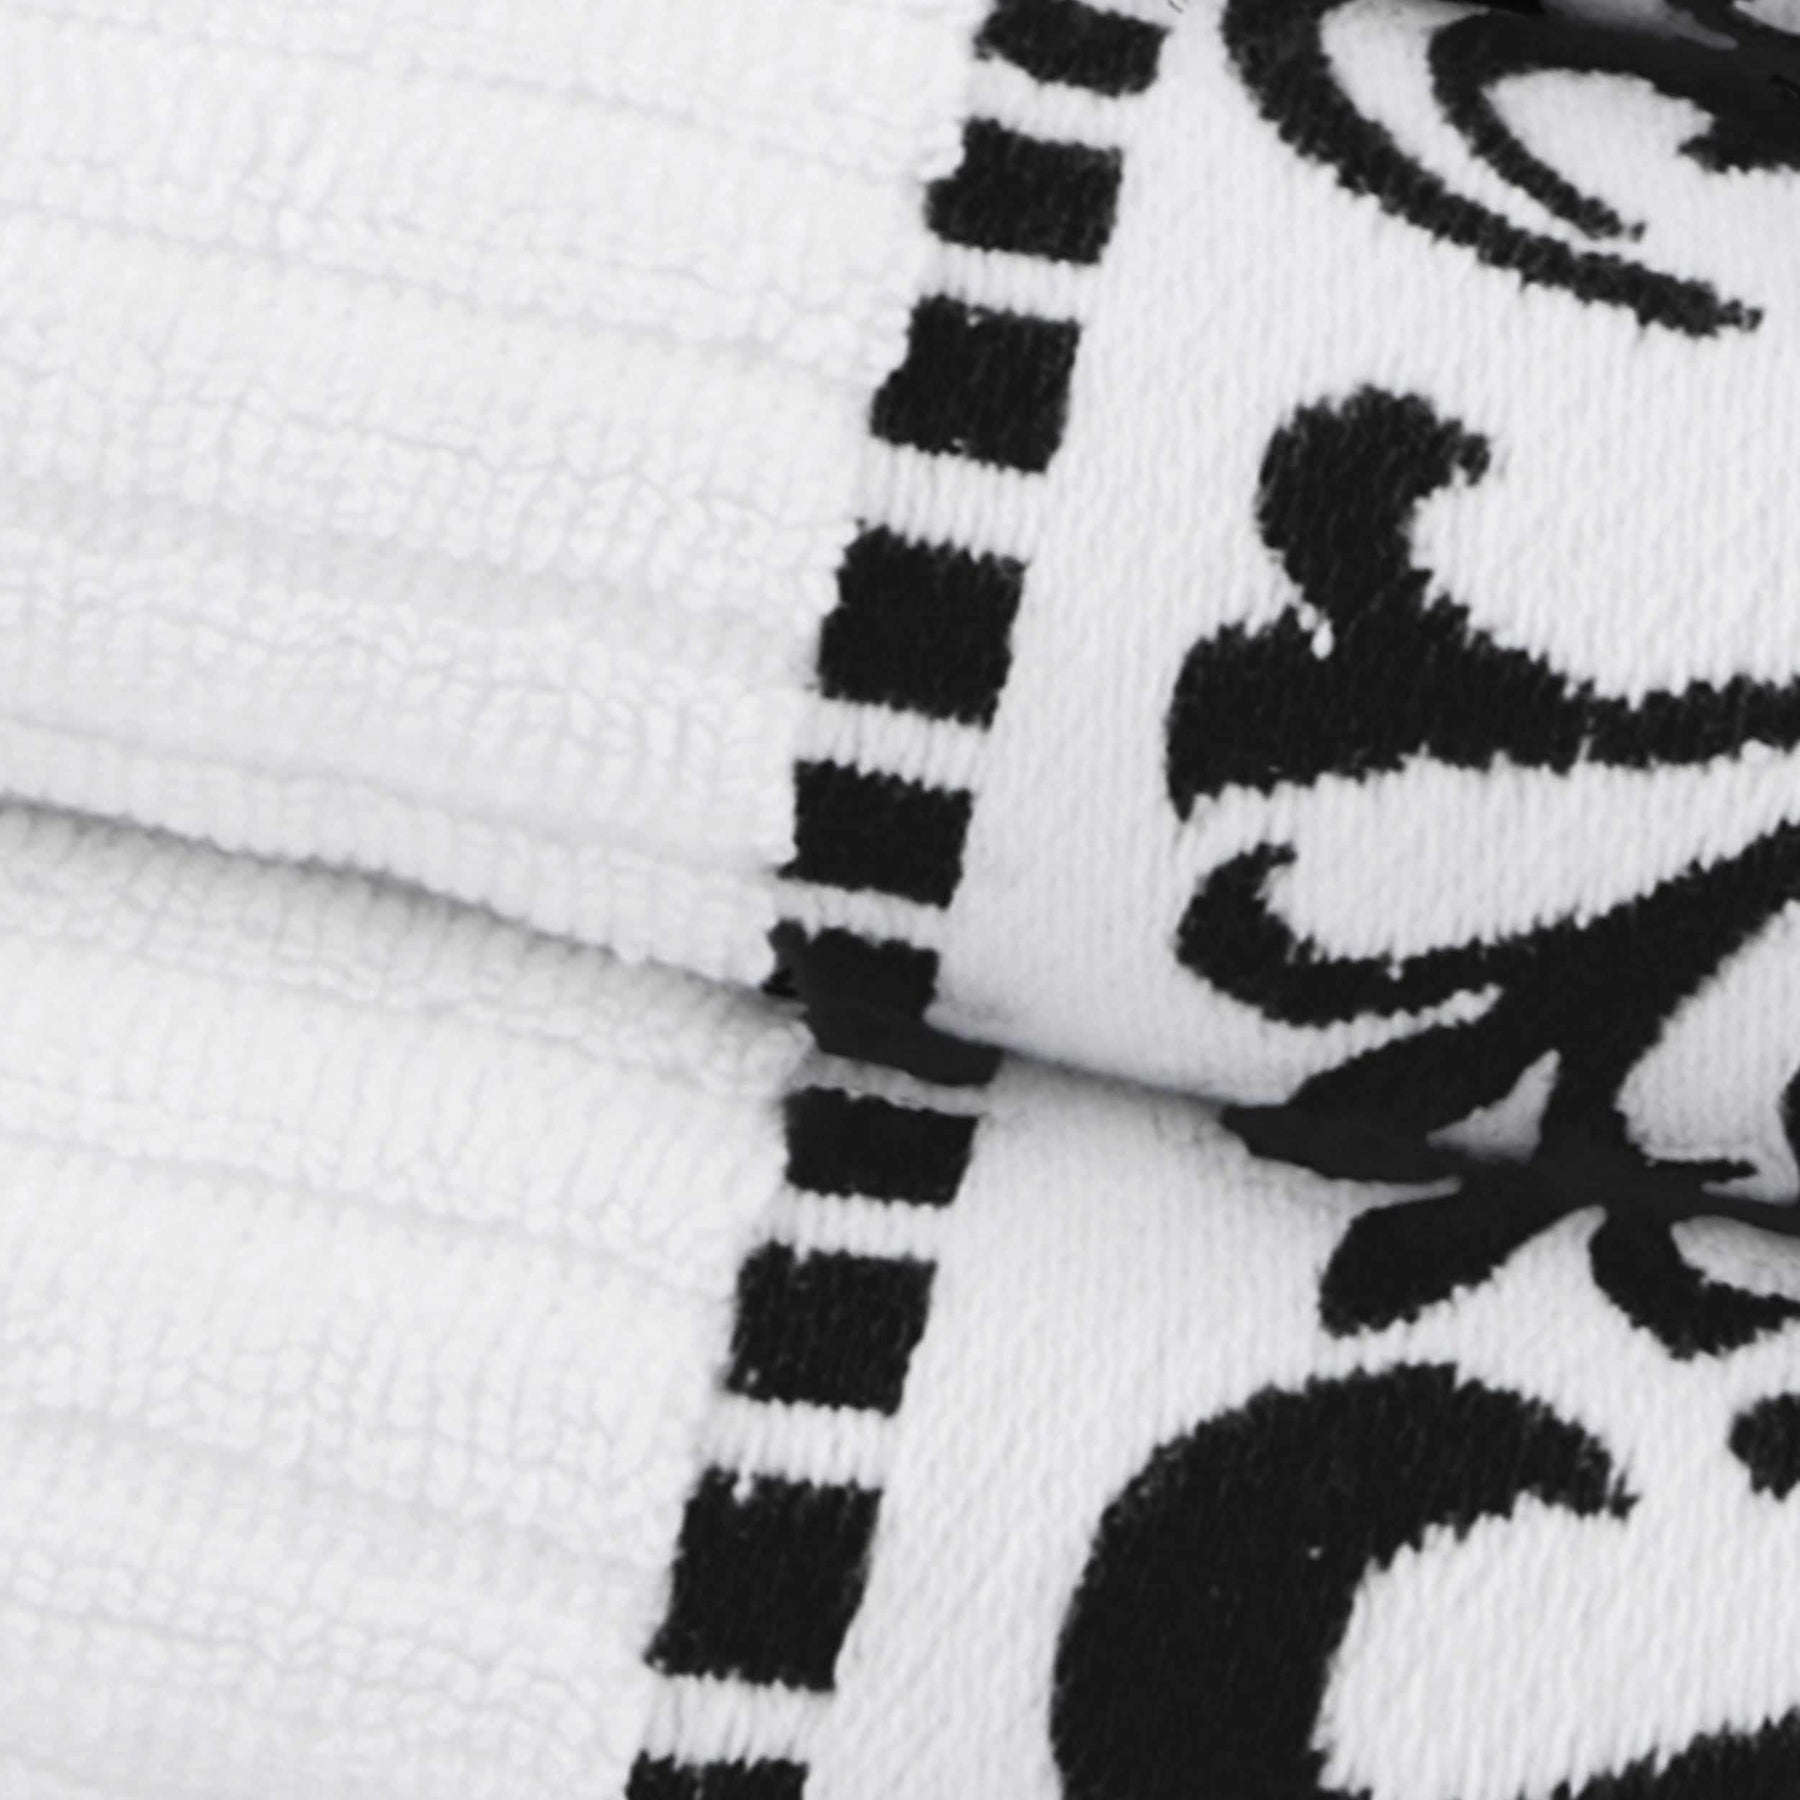 Superior Athens Cotton 8-Piece Towel Set with Greek Scroll and Floral Pattern - White-Black